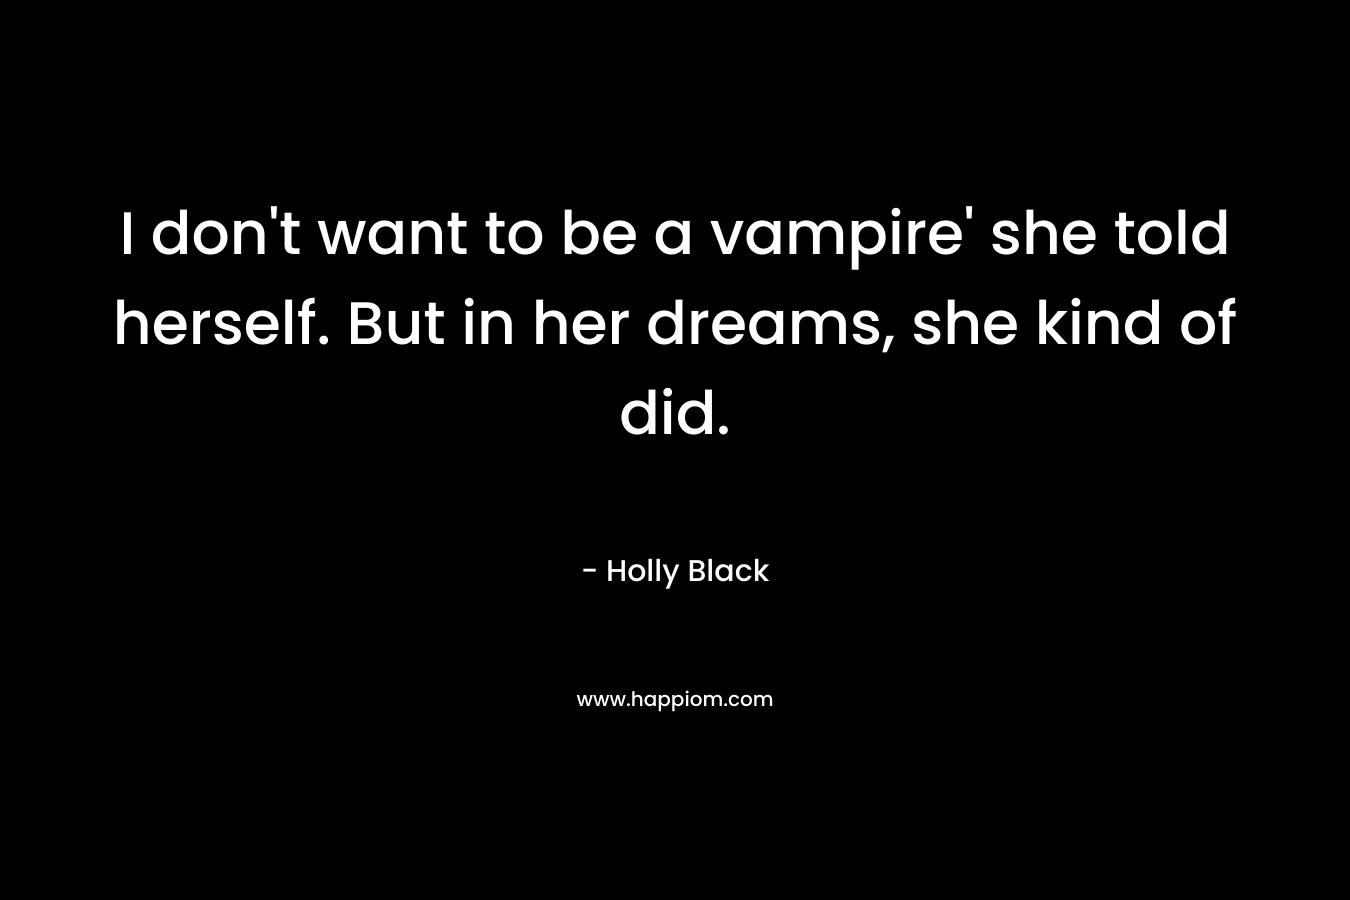 I don't want to be a vampire' she told herself. But in her dreams, she kind of did.